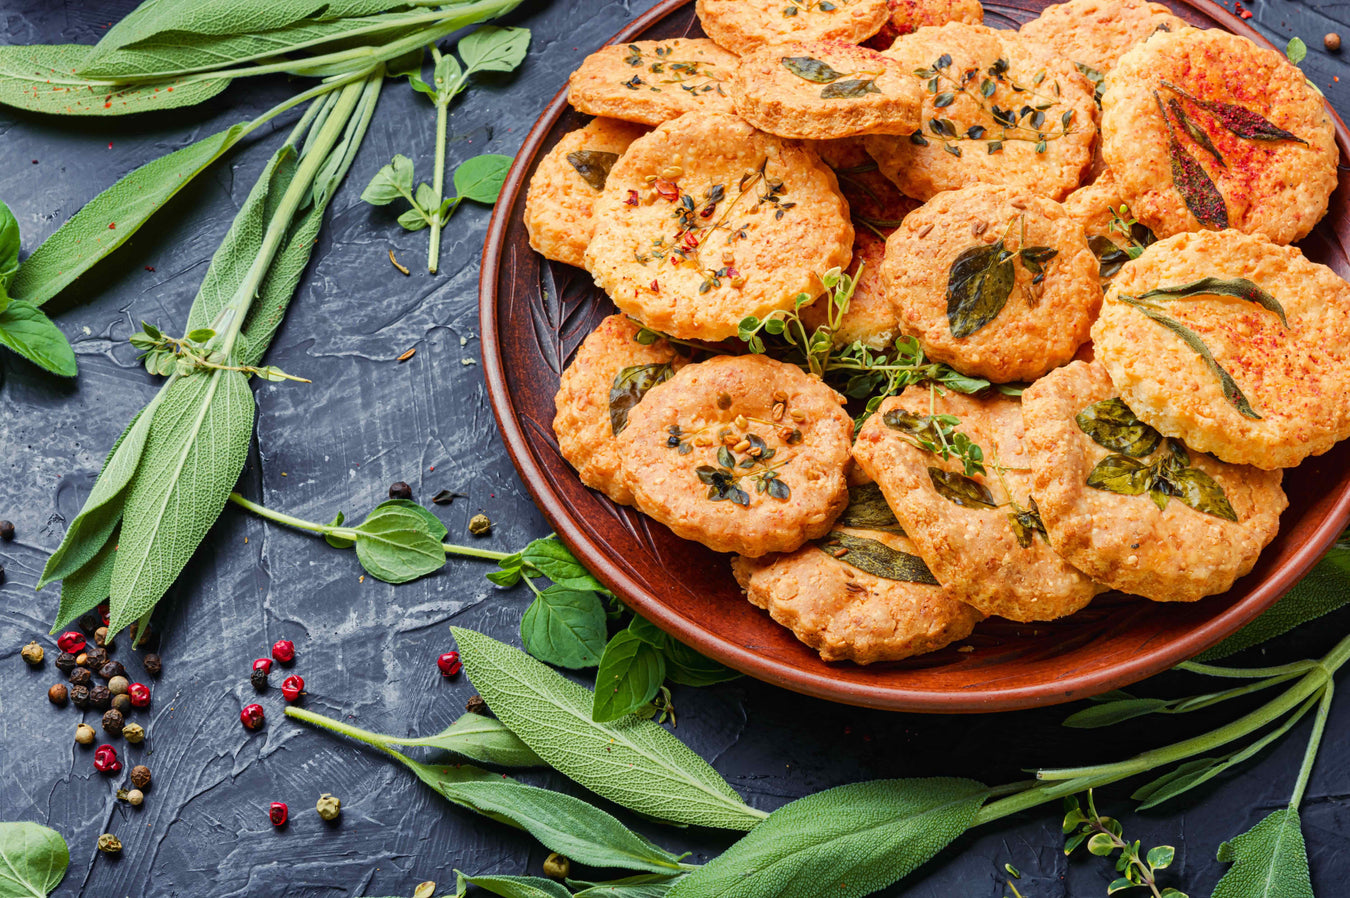 Chef Jessica's Savoury Shortbread & Herb Marinated Olives